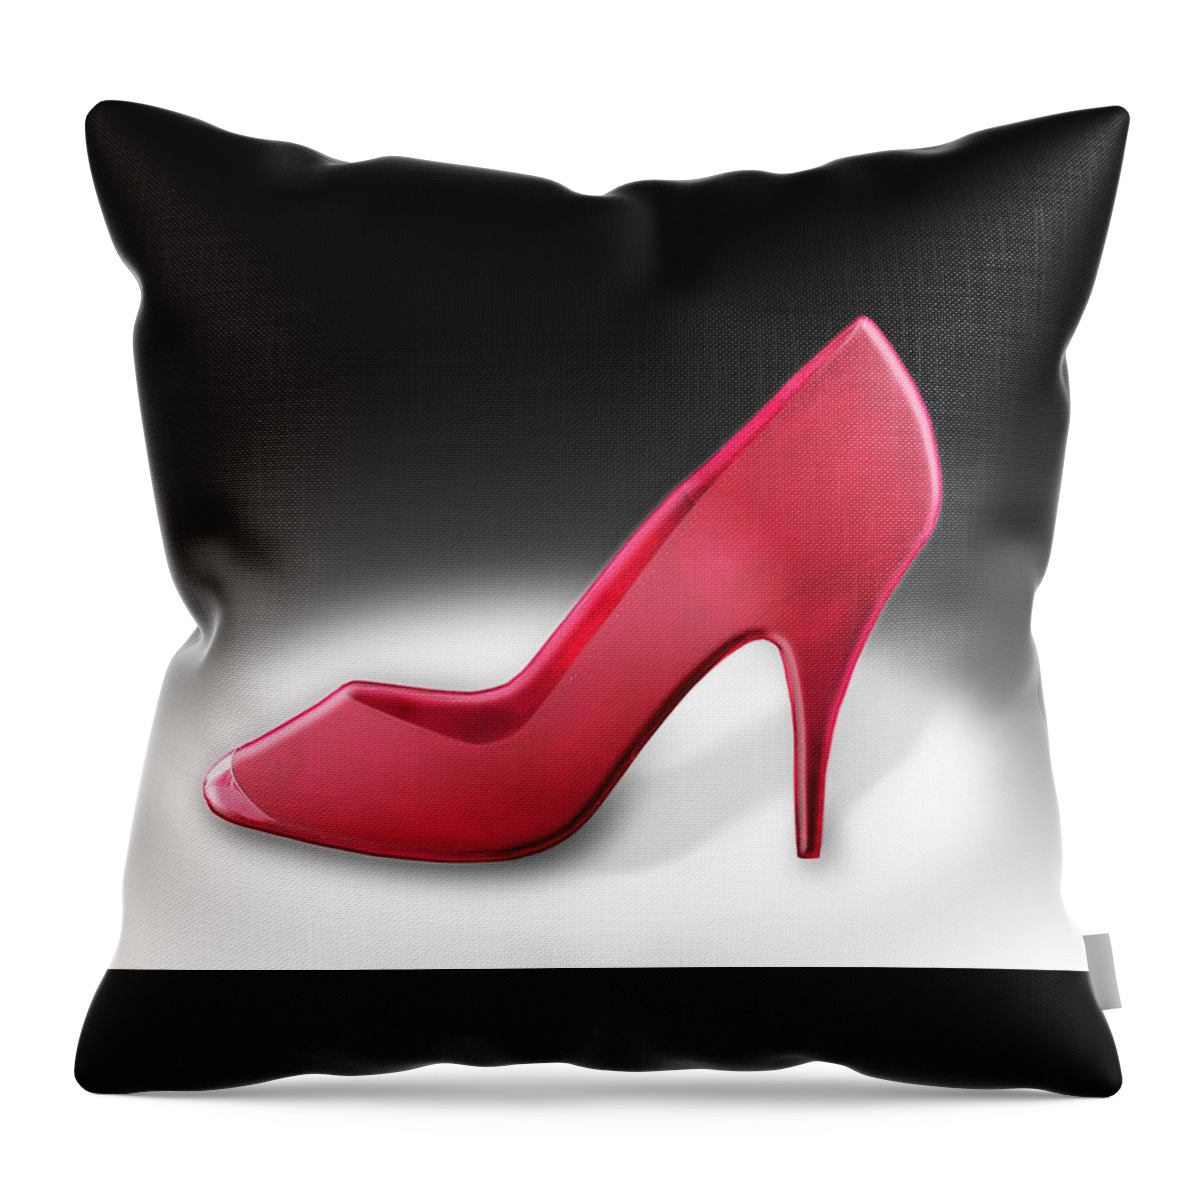 Apparel Throw Pillow featuring the photograph Lady Luck by Yuri Lev